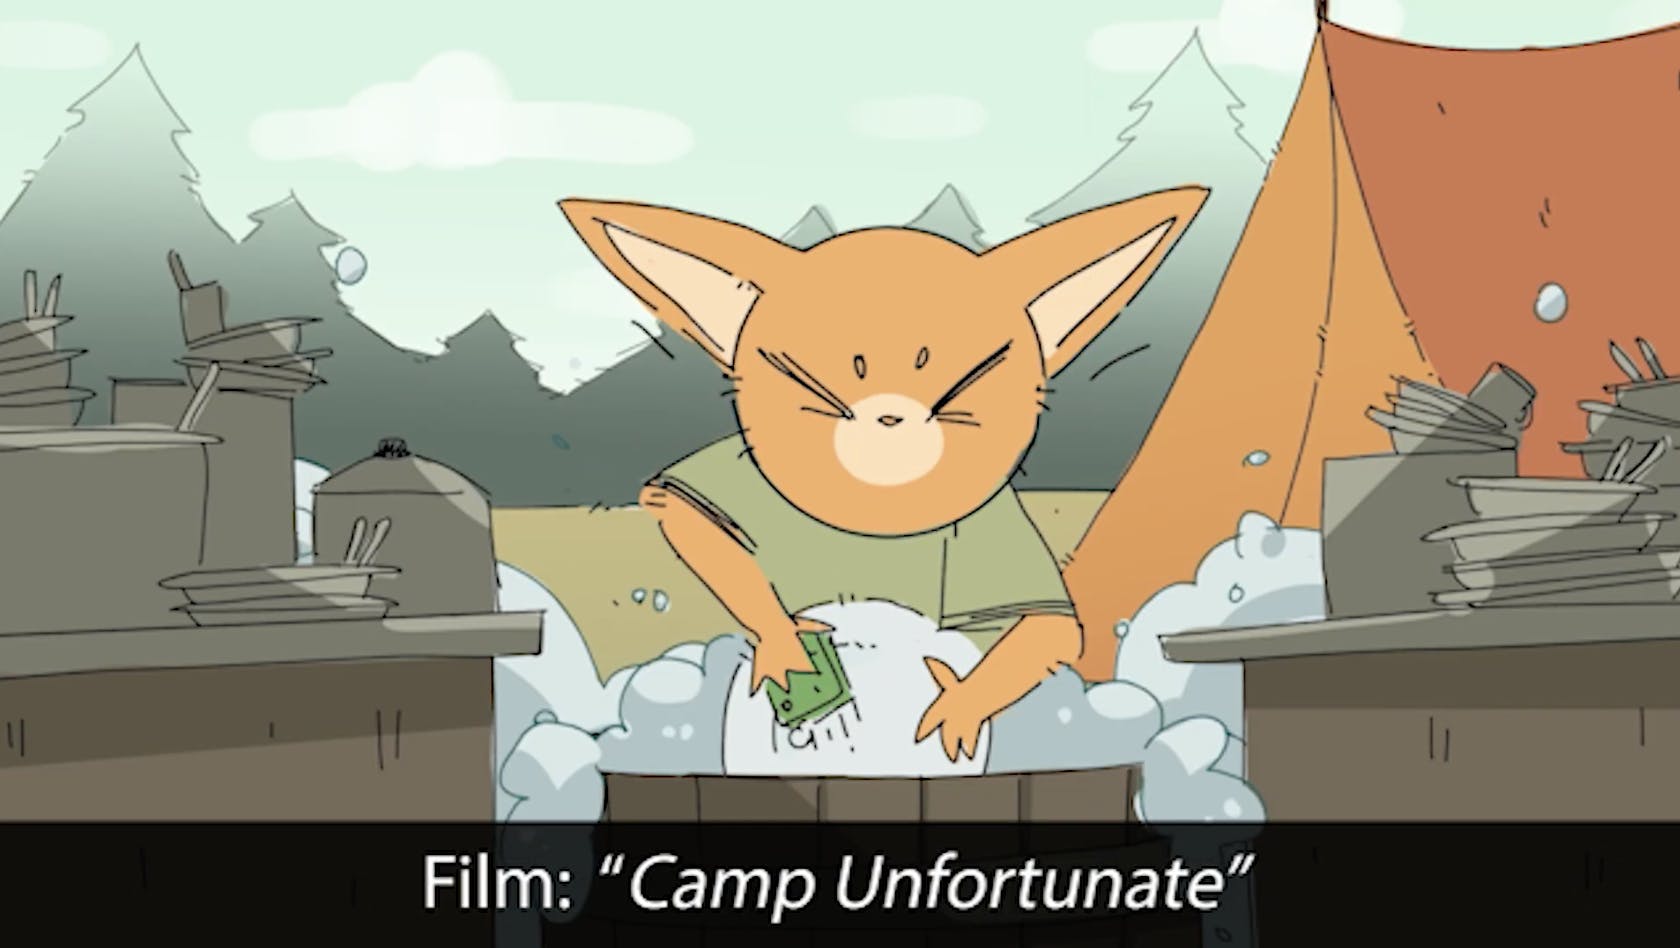 A fox scrubs dishes in front of a tent, with text at the bottom reading "Film: Camp Unfortunate"